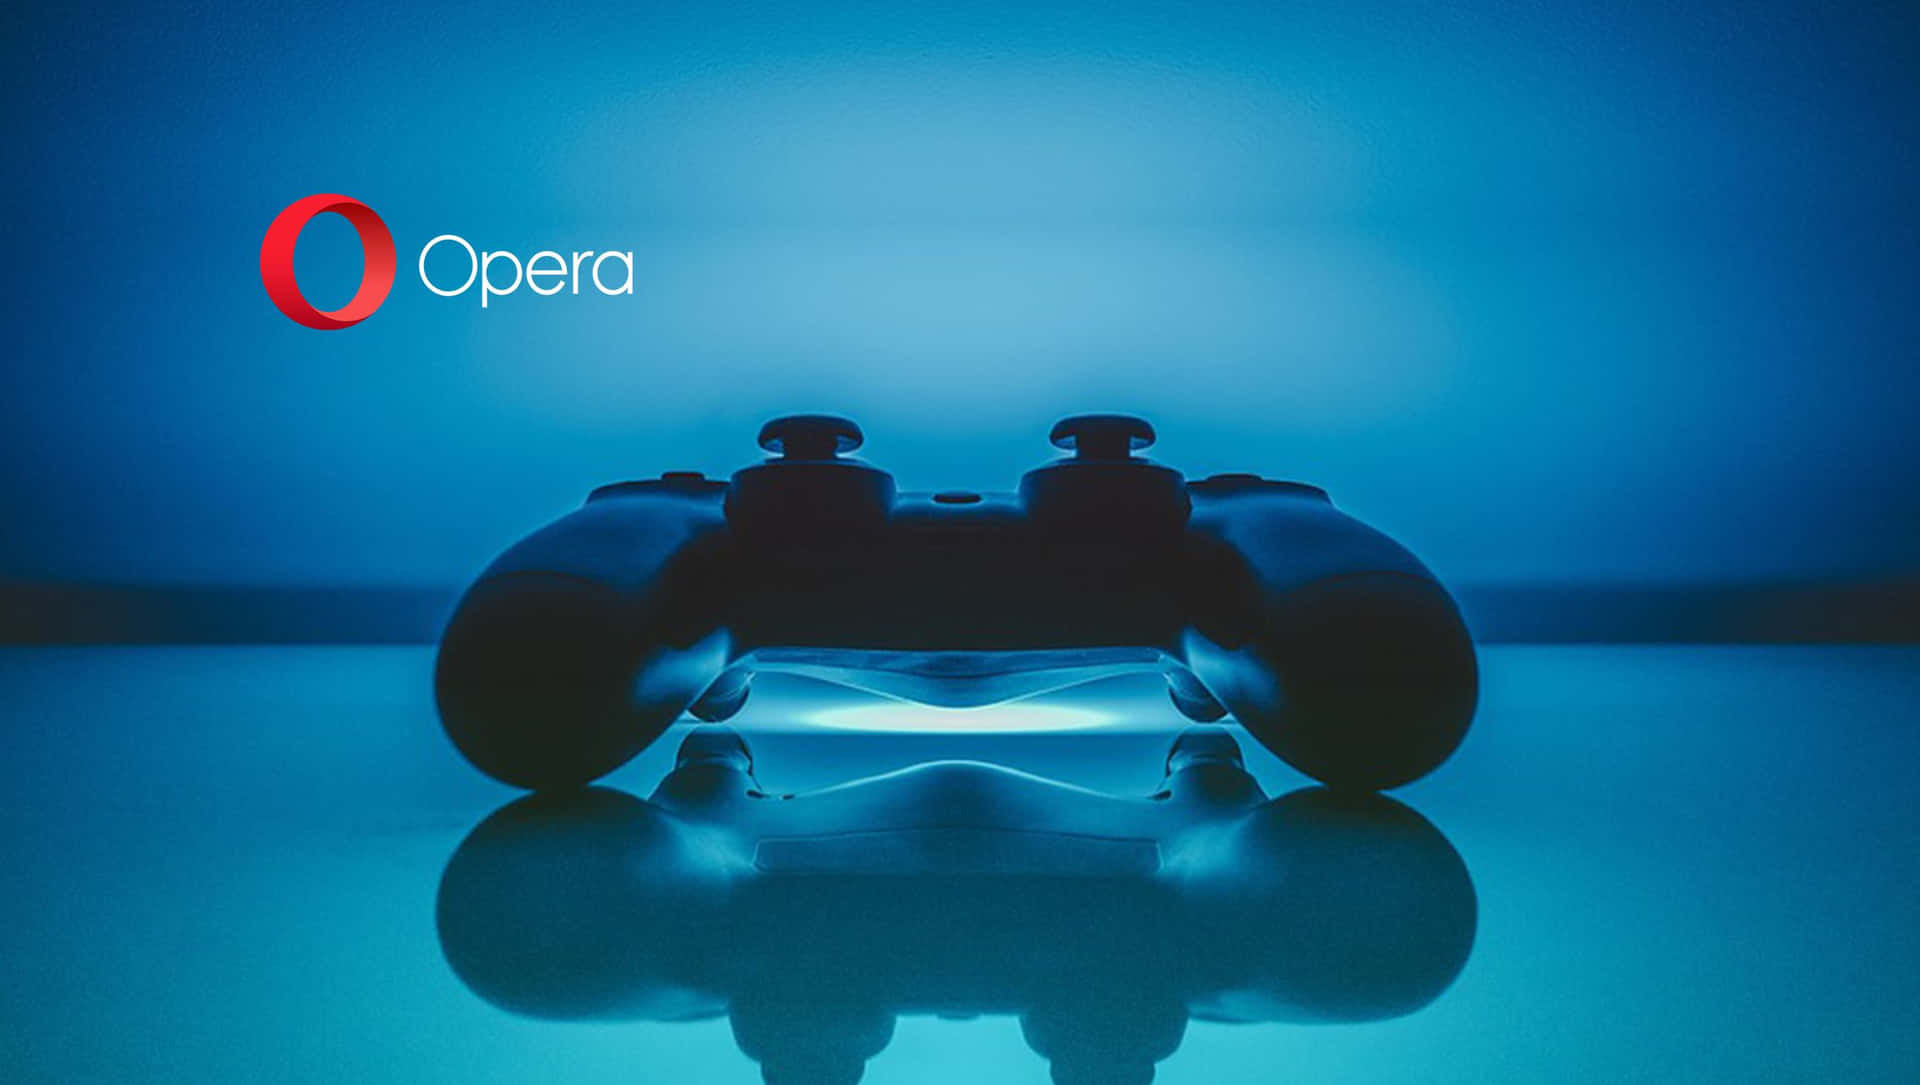 10 Opera HD Wallpapers and Backgrounds